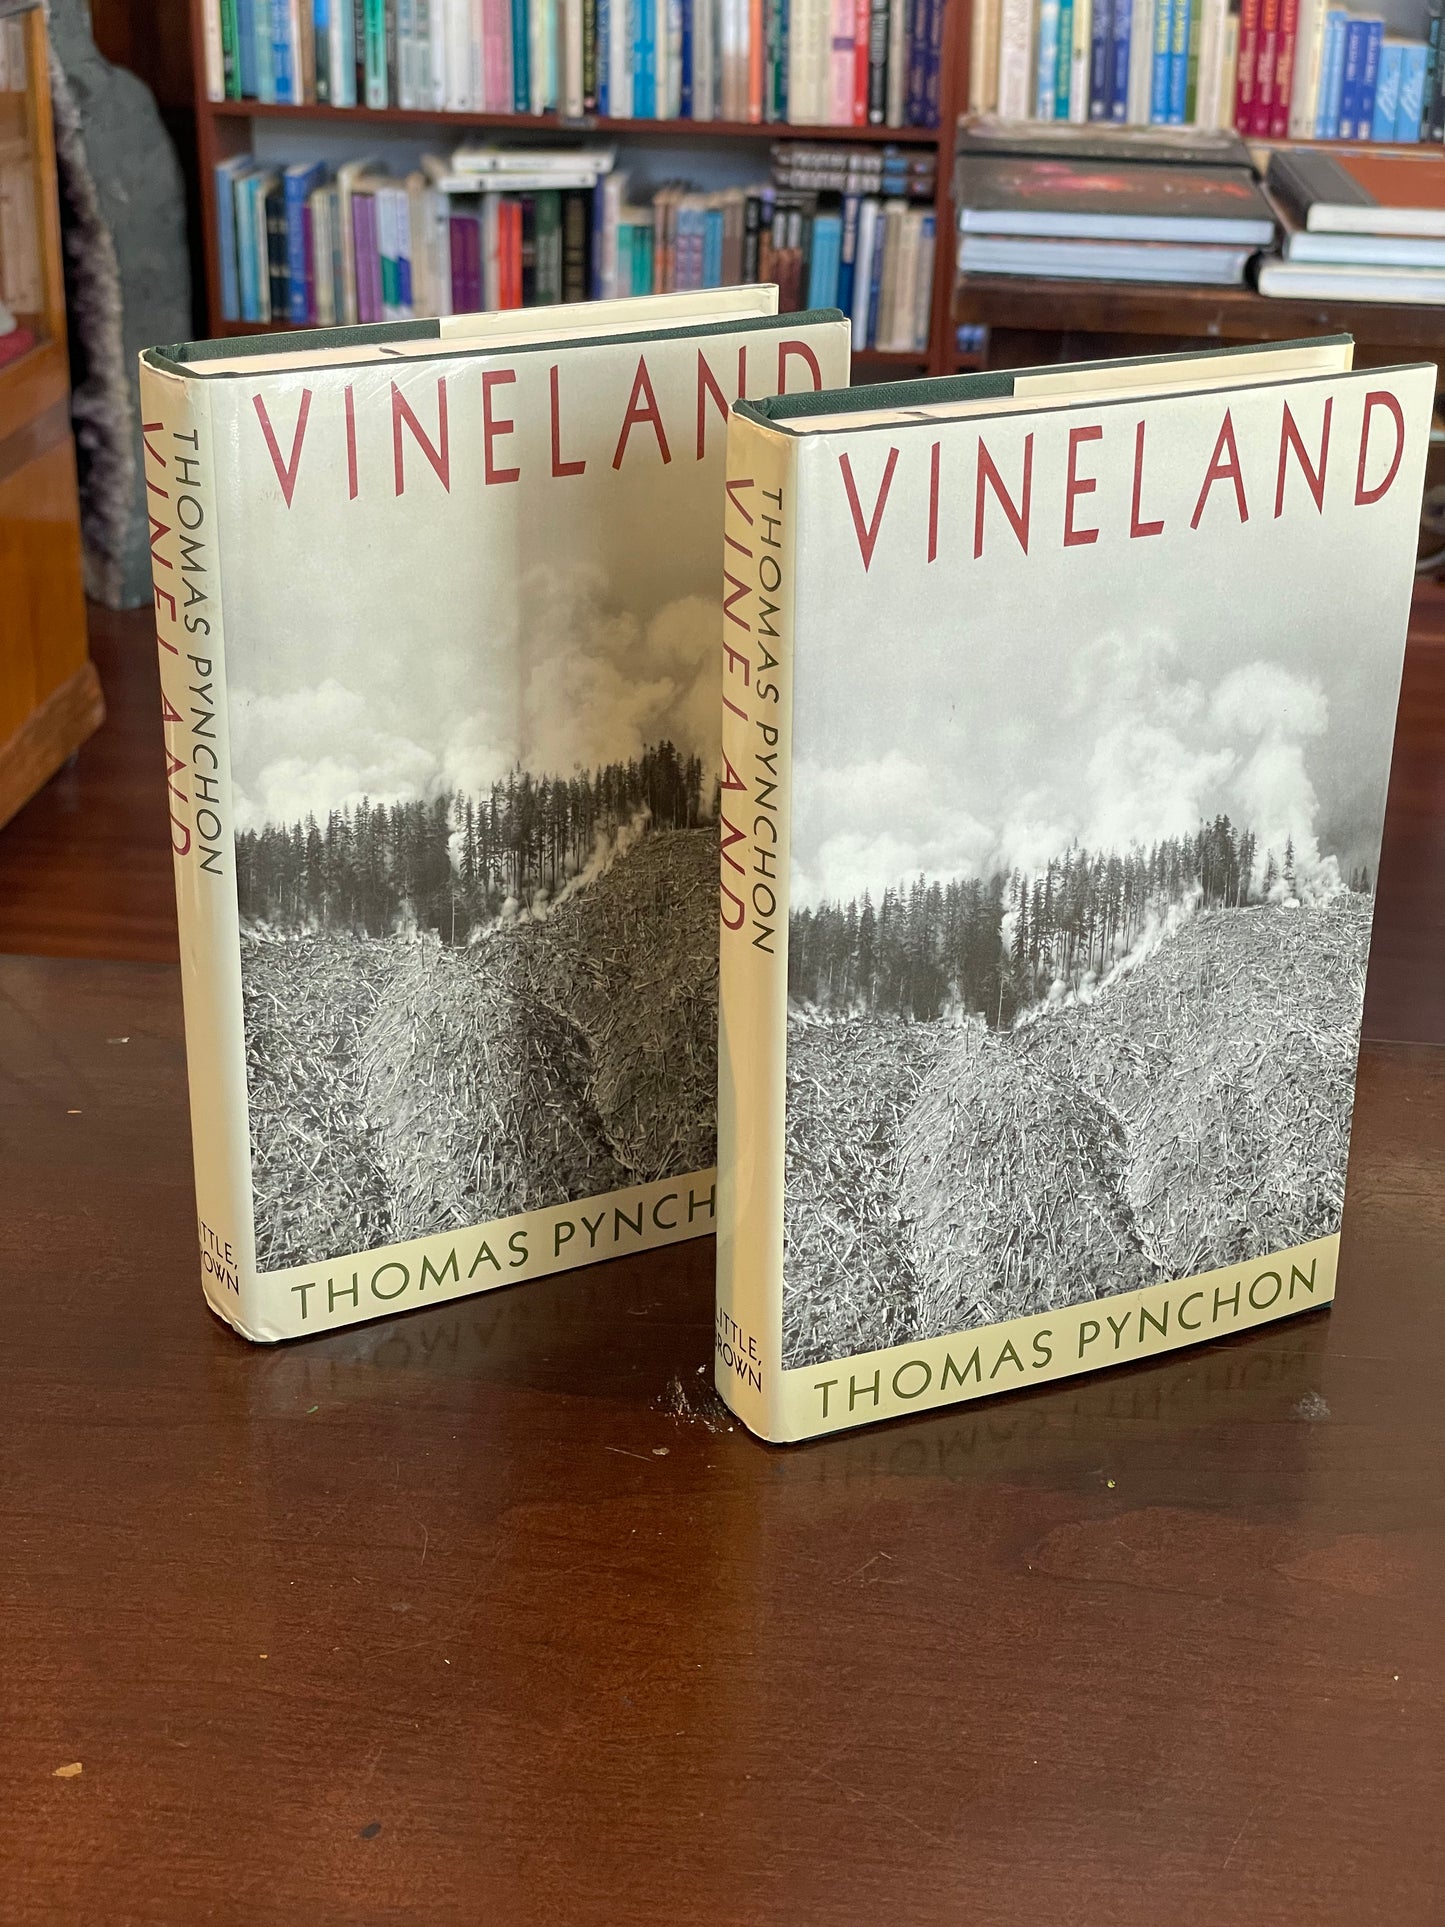 Vineland by Thomas Pynchon (first edition)